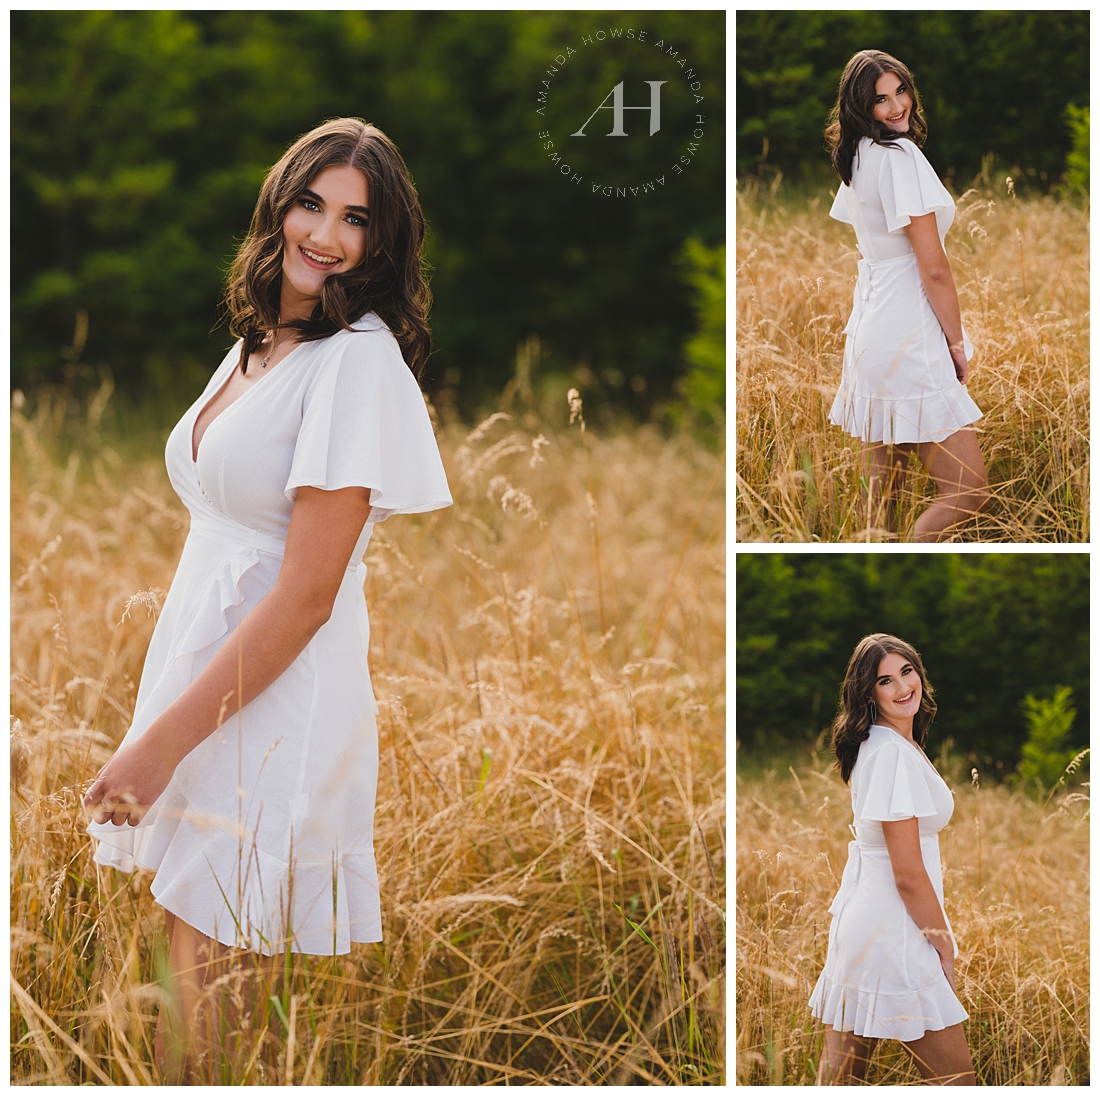 Senior Portraits in a Wheat Field | Rustic Senior Photos, Outfit Inspo for Summer Portraits, Tacoma Senior Portraits | Photographed by the Best Tacoma Senior Photographer Amanda Howse Photography